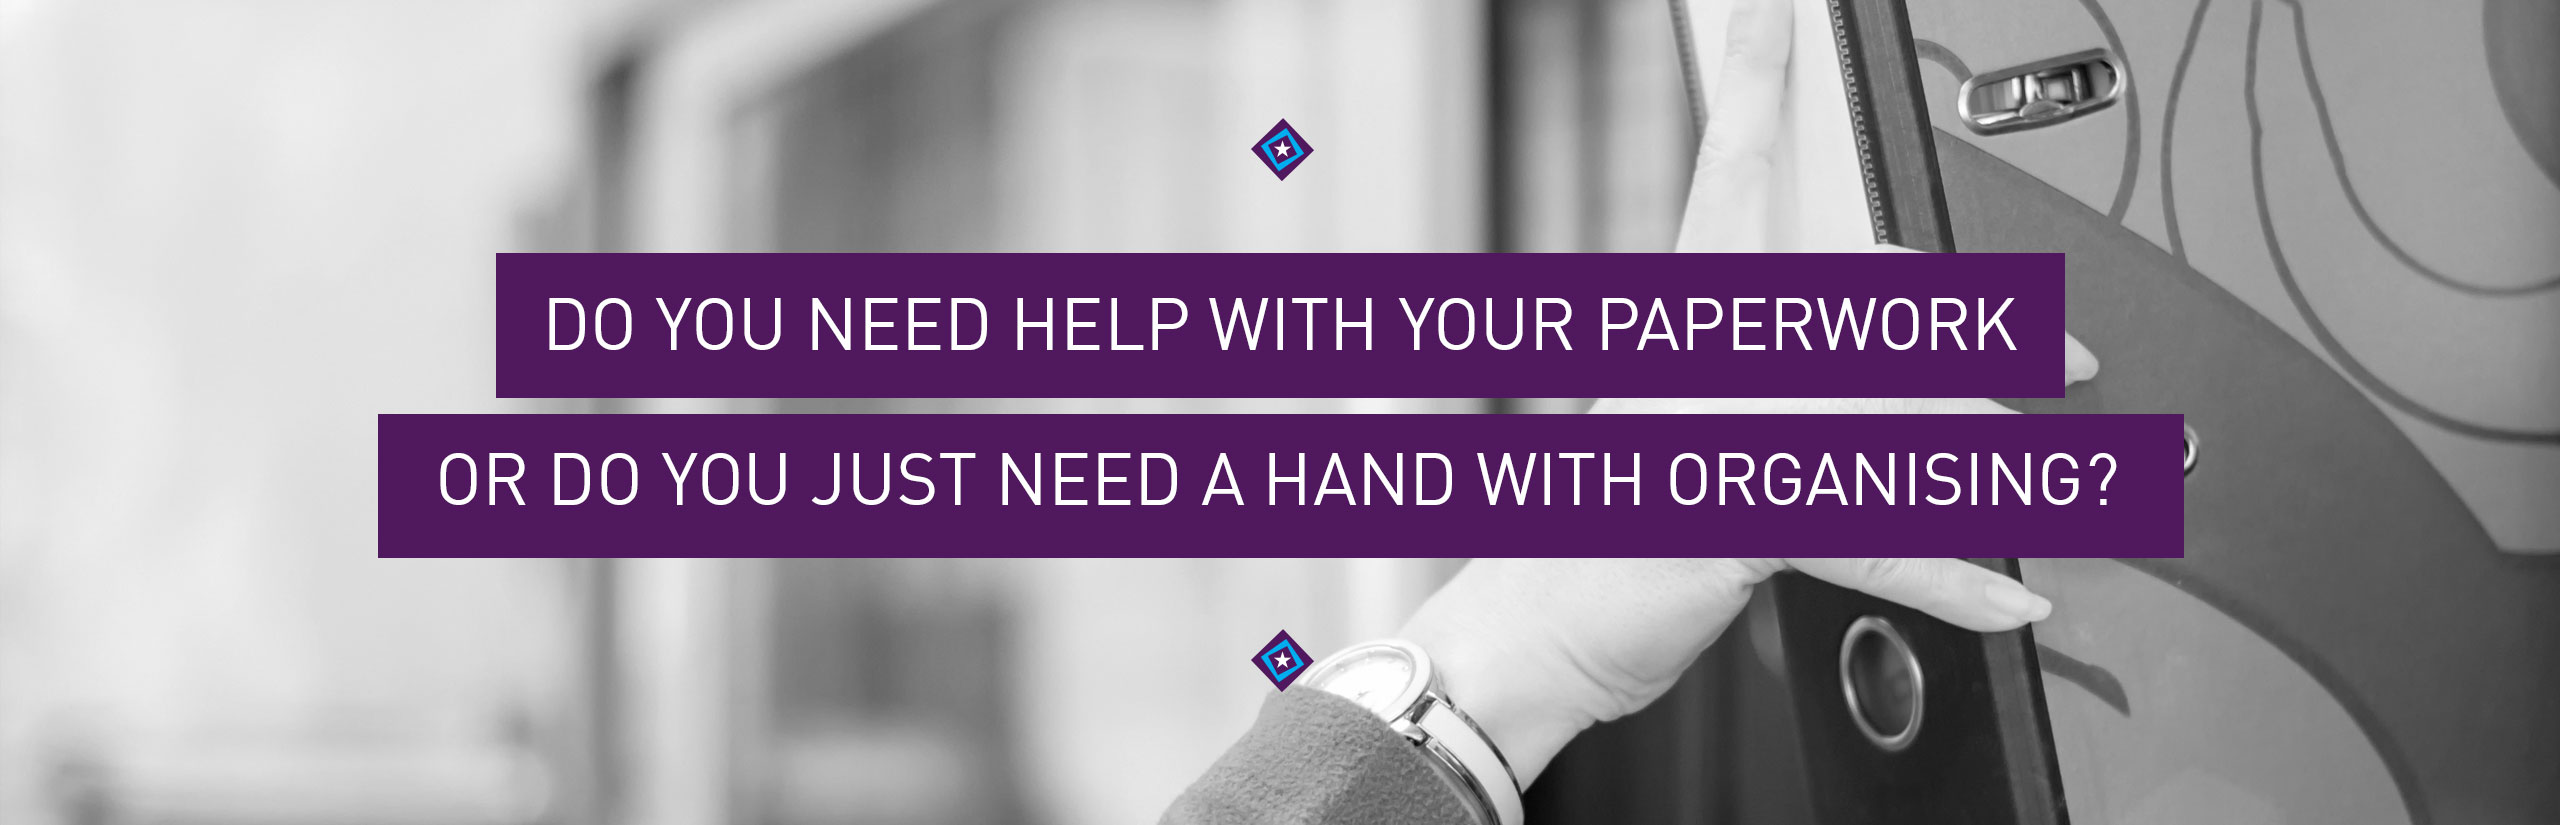 a helping hand in organising your paperwork and filing